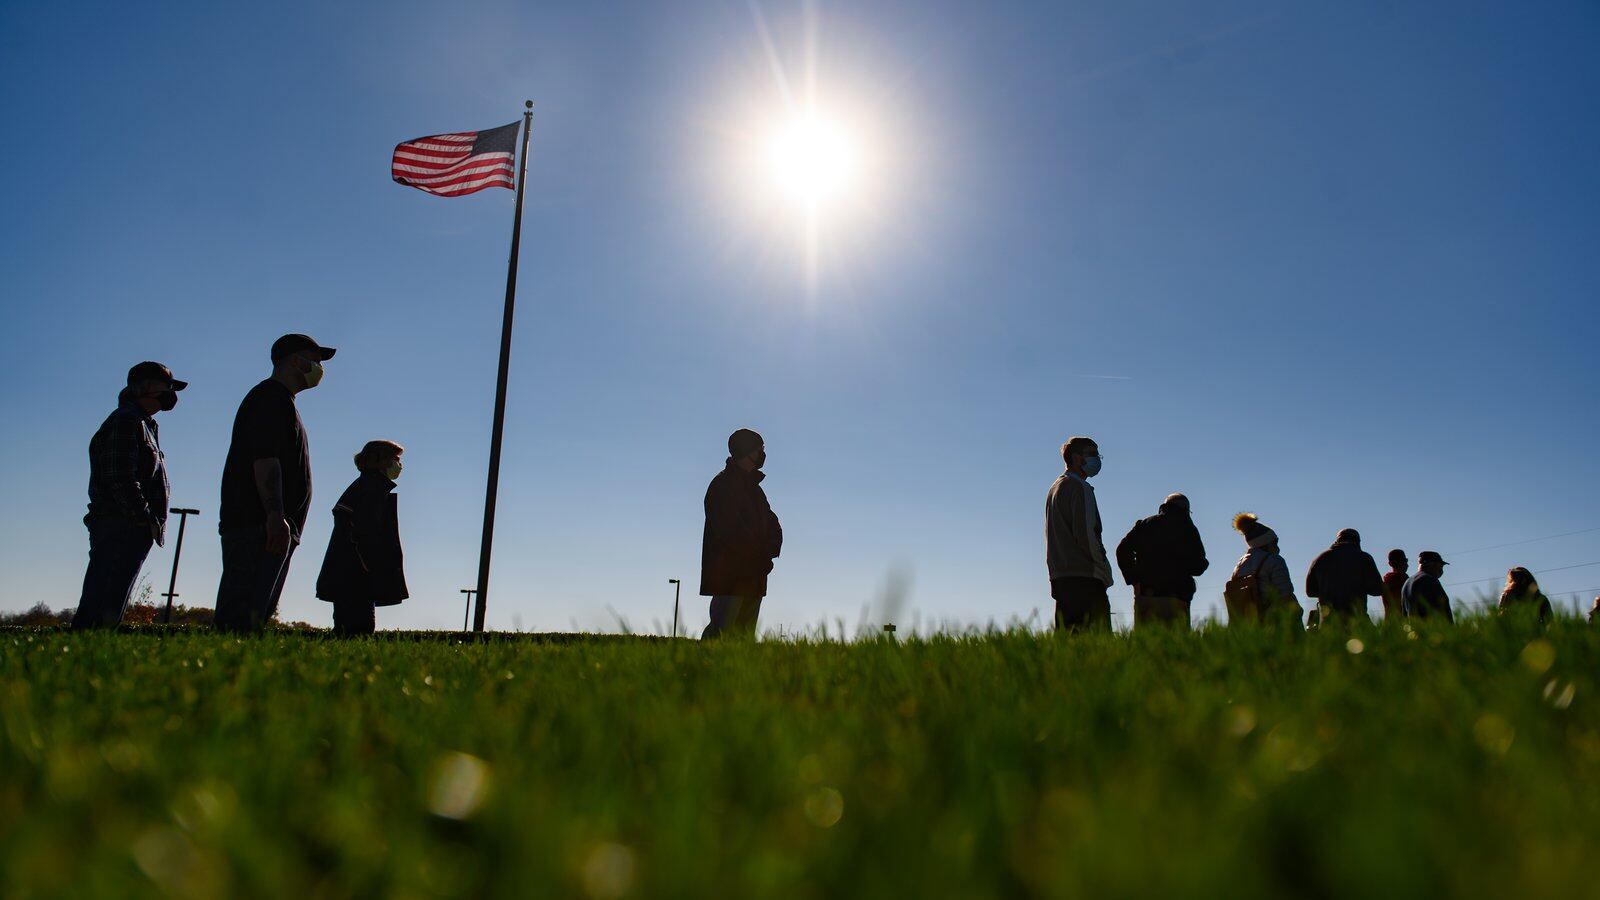 A row of people in silhouette standing on a grassy hill with a U.S. flag waving in the background